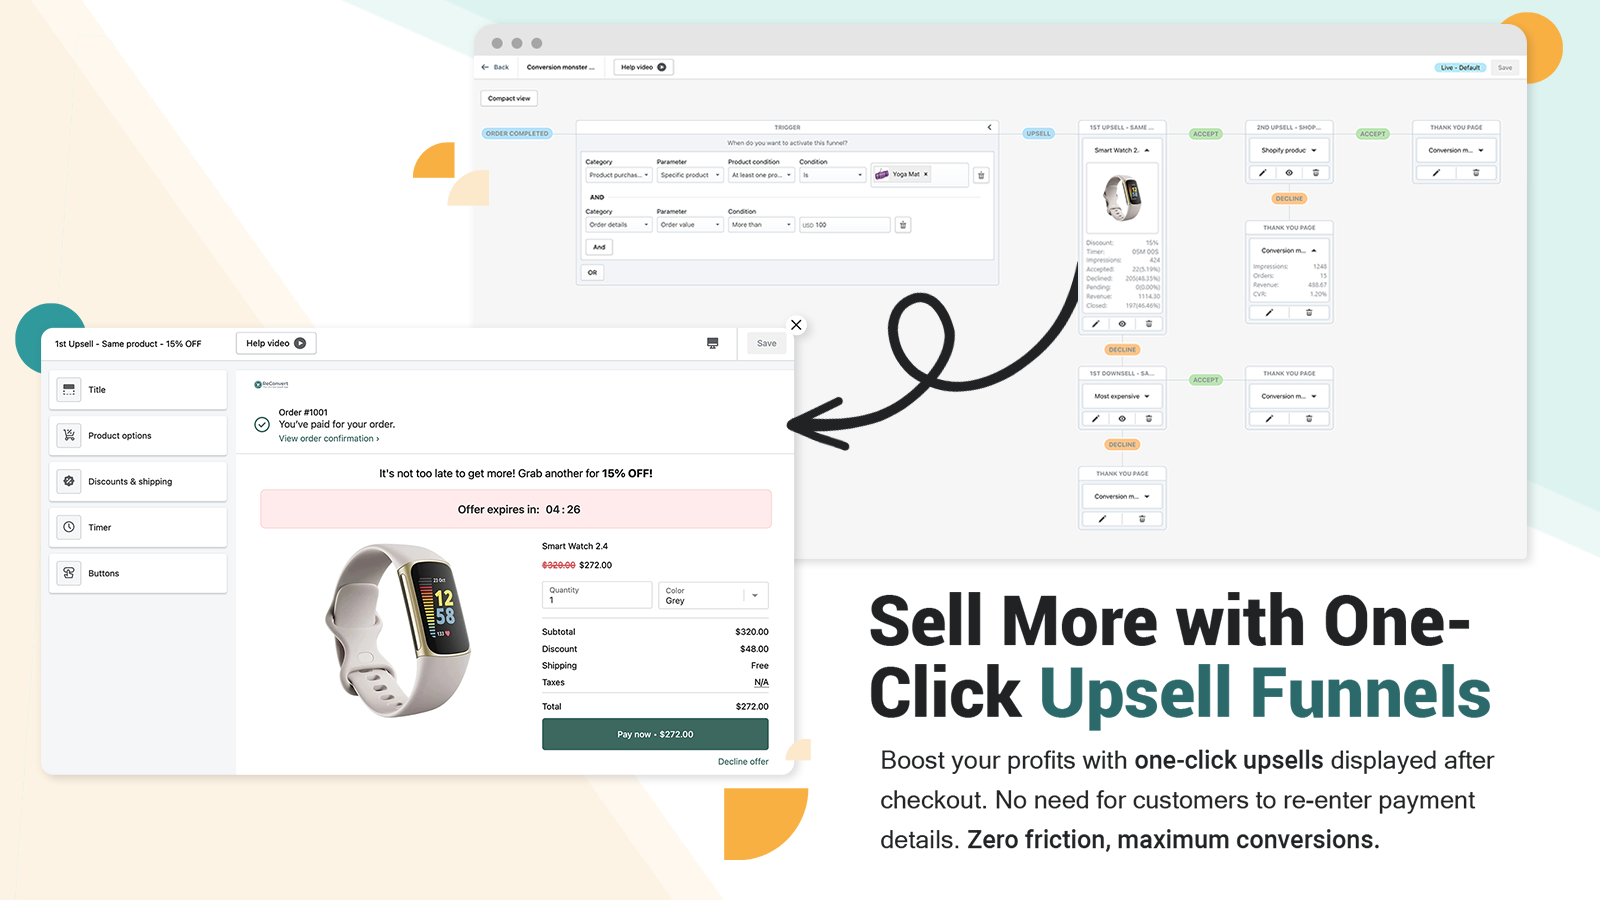 Deploy advanced one click post purchase upsell funnels